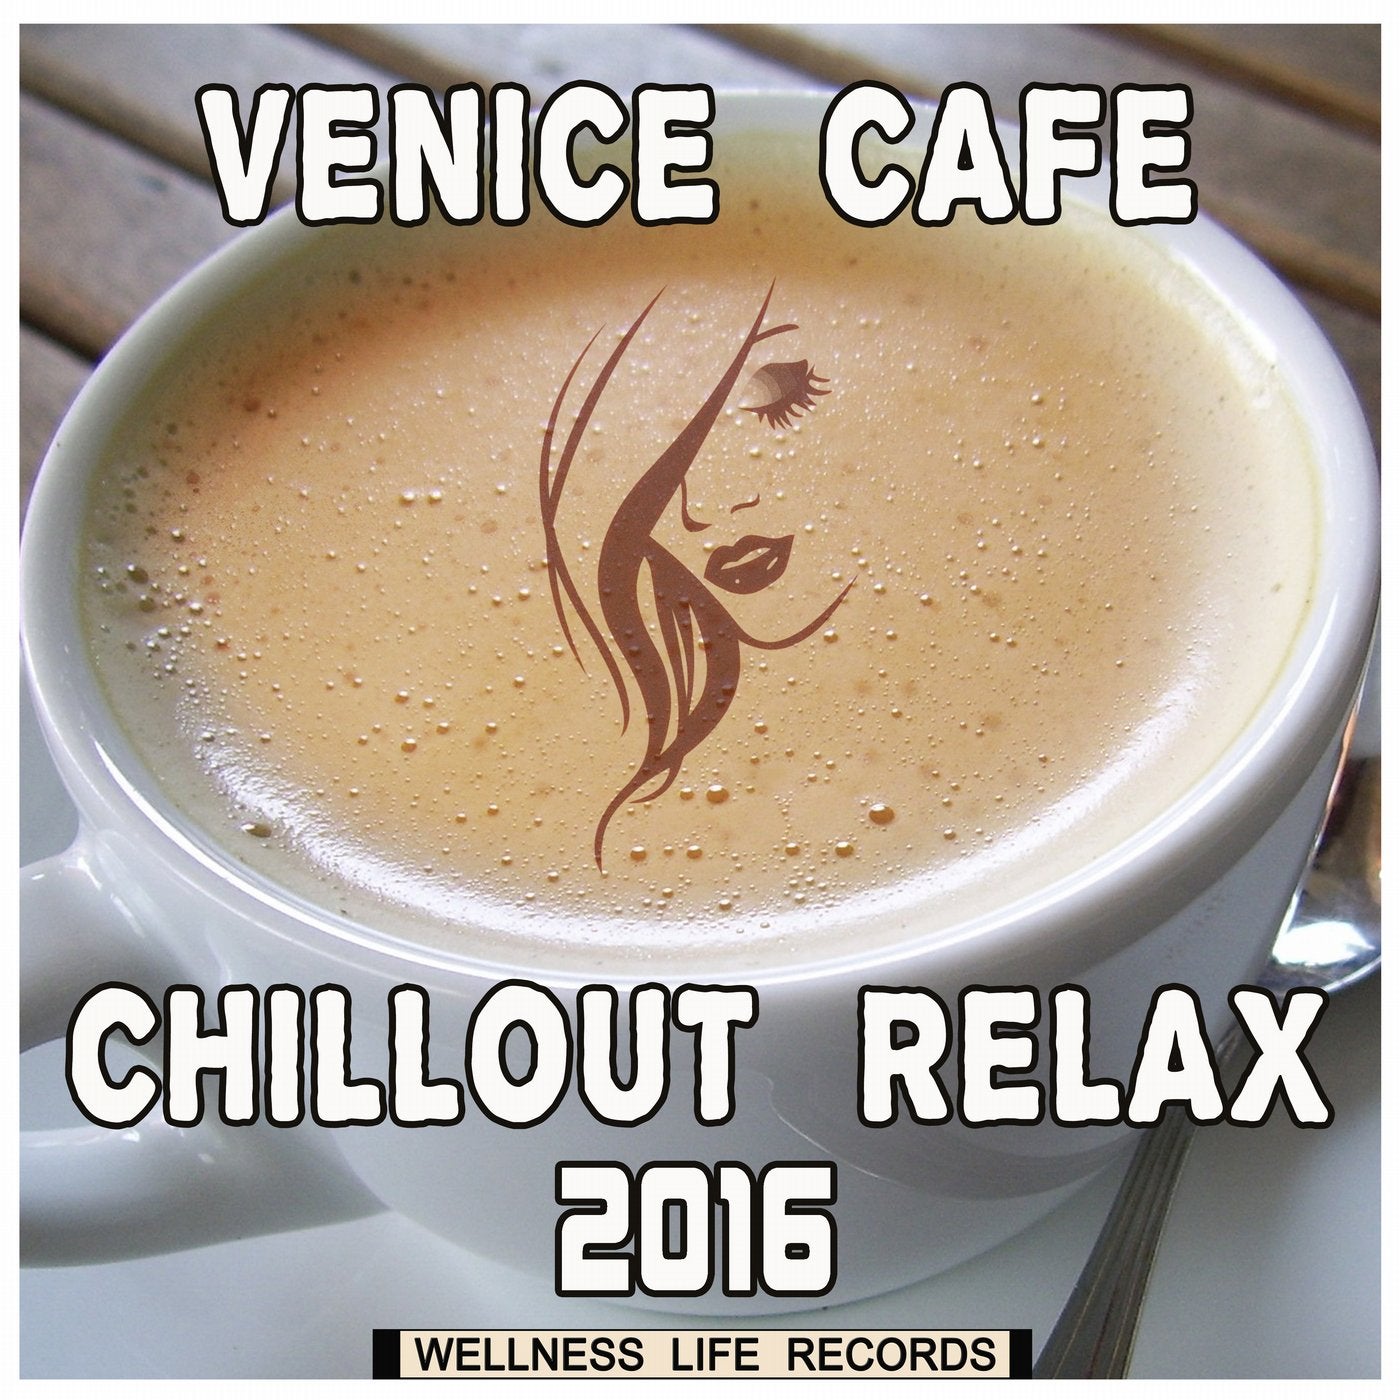 Venice Cafe Chillout Relax 2016